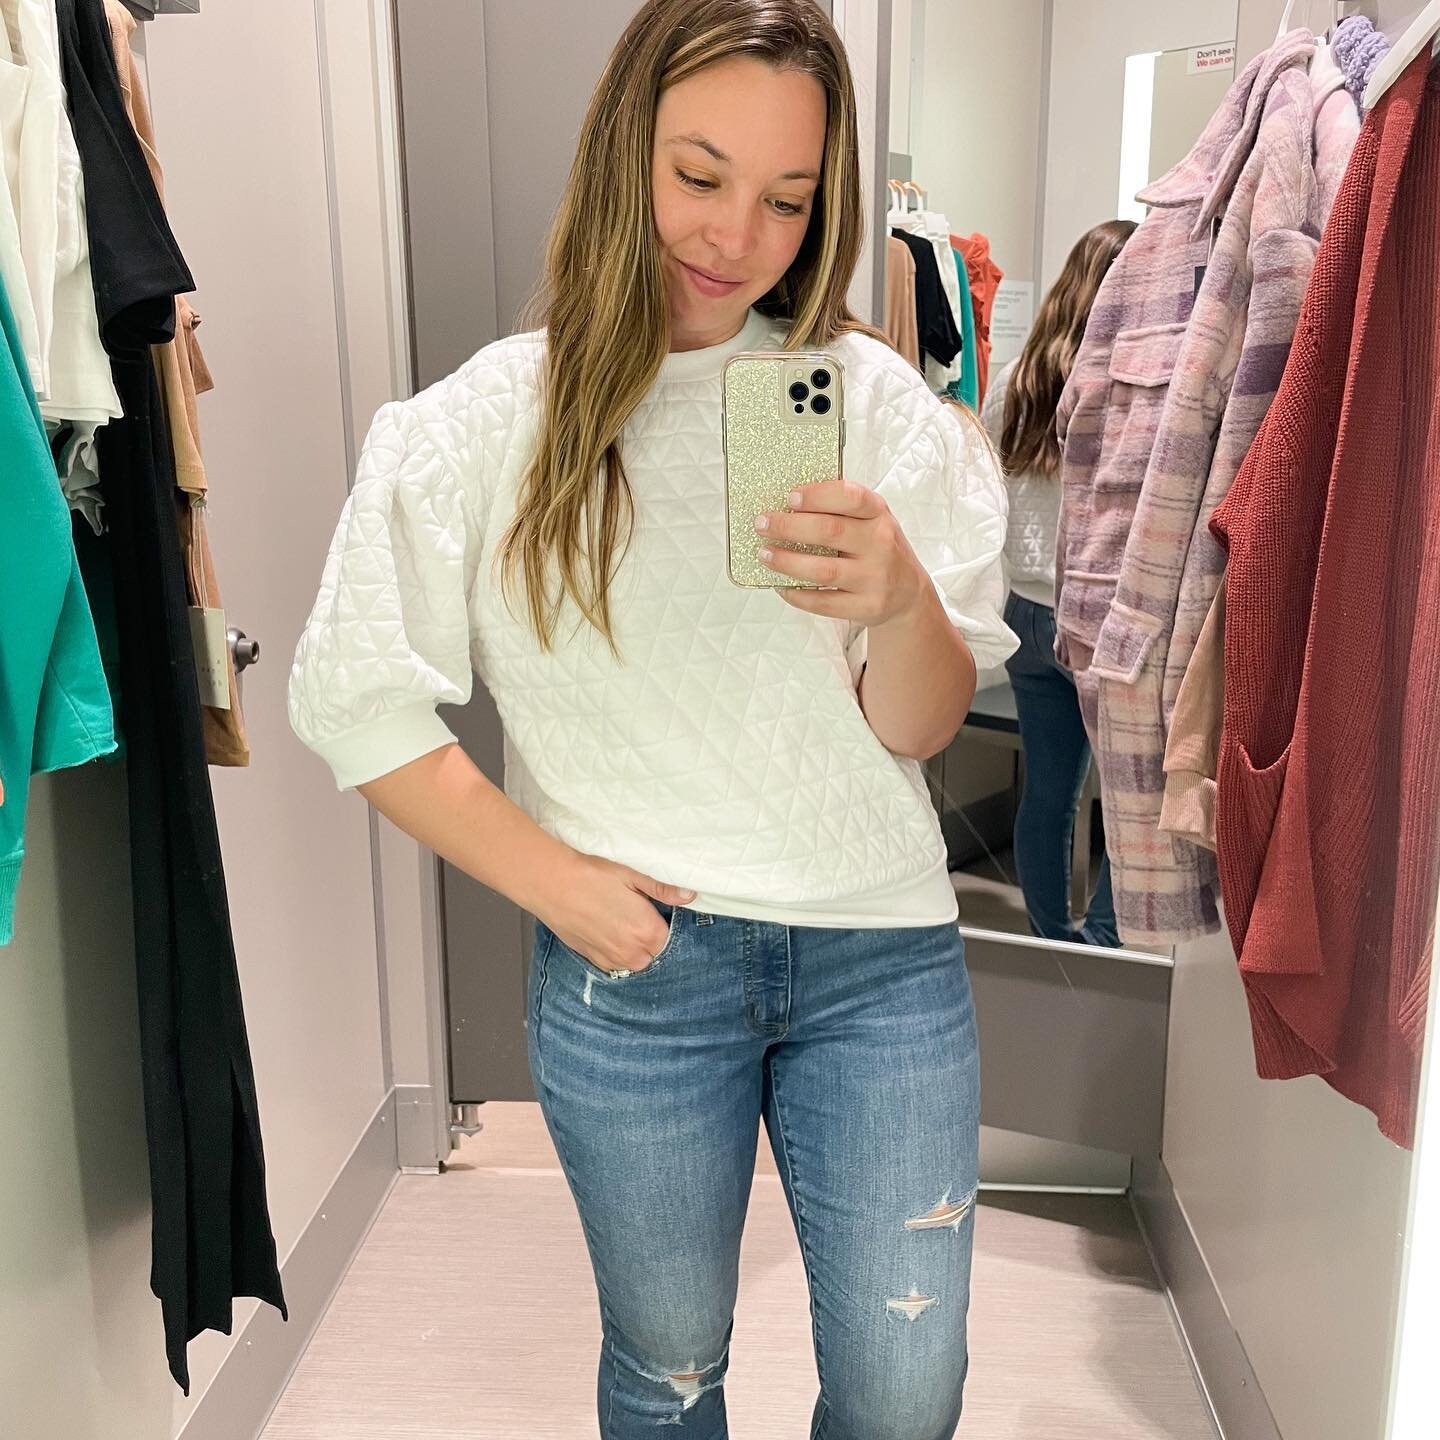 Did you catch my fall @target reel?! I found the cutest tops and best fitting jeans 🙌🏼 Which outfit was your favorite??

-
I am getting so excited for fall fashion so expect a lot of try-ons coming your way! 💗

You can shop all these looks by clic